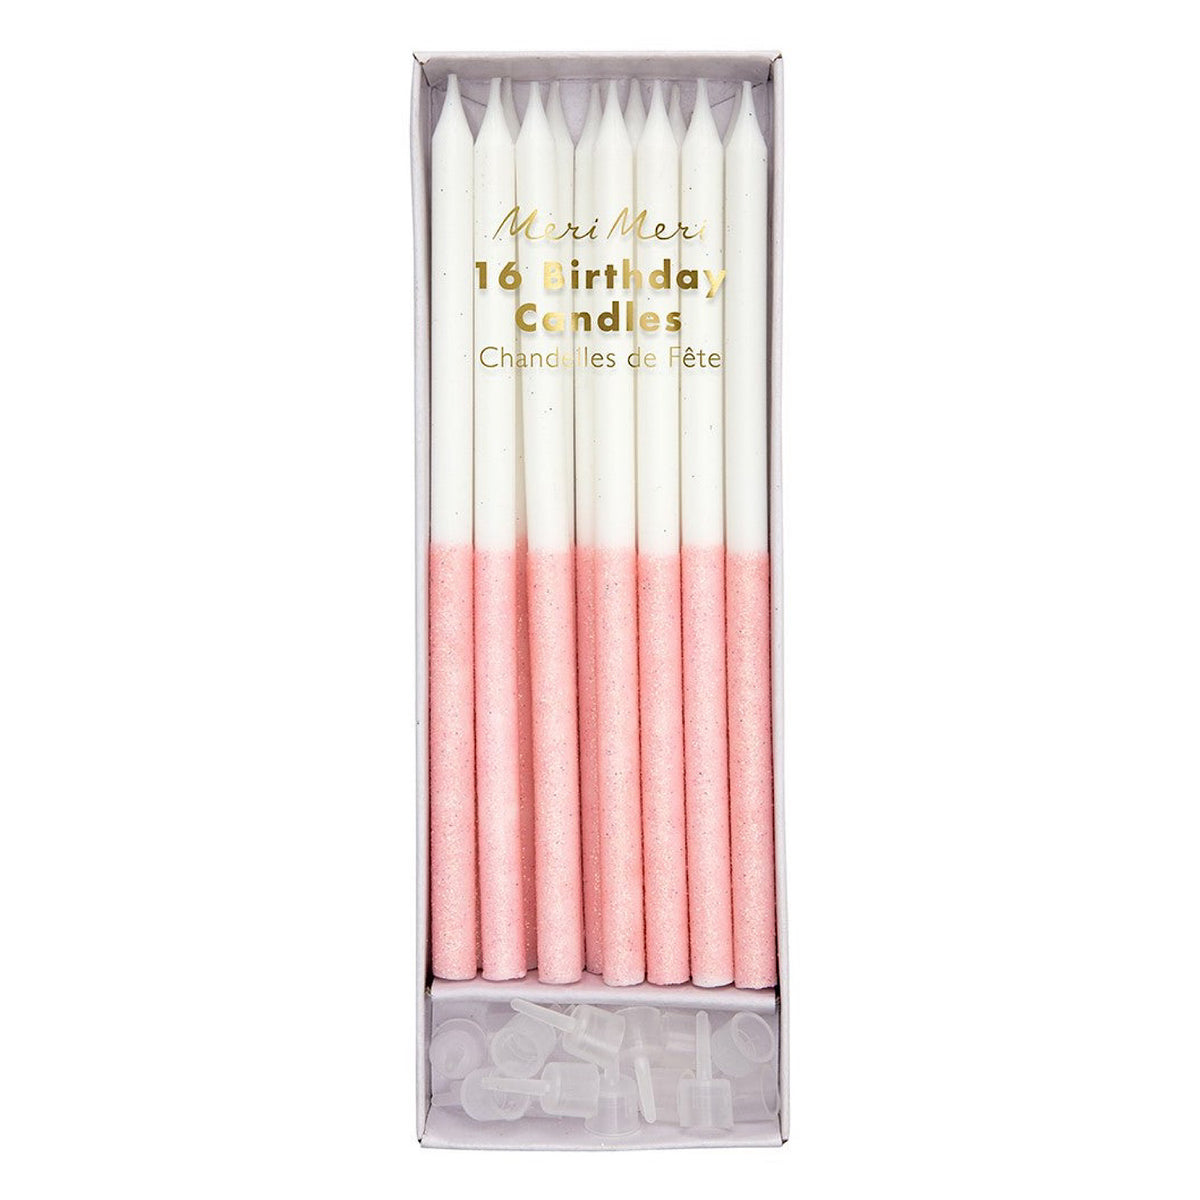 Pale Pink Glitter Dipped Birthday Candles